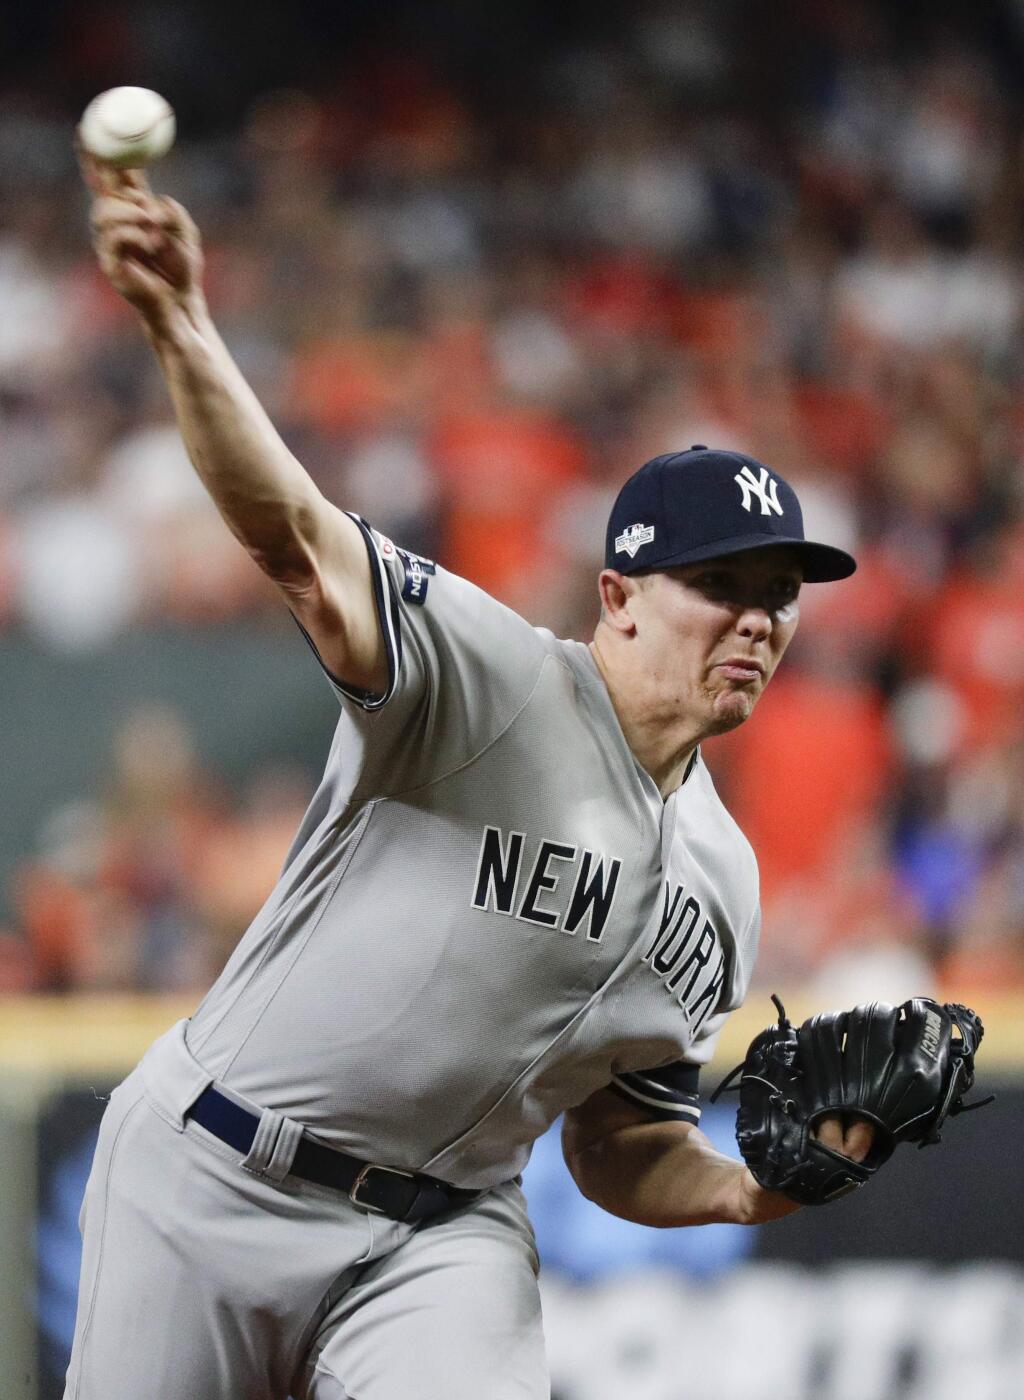 New York Yankees starting pitcher Chad Green throws against the Houston Astros during the first inning in Game 6 of baseball's American League Championship Series Saturday, Oct. 19, 2019, in Houston. (AP Photo/Eric Gay)